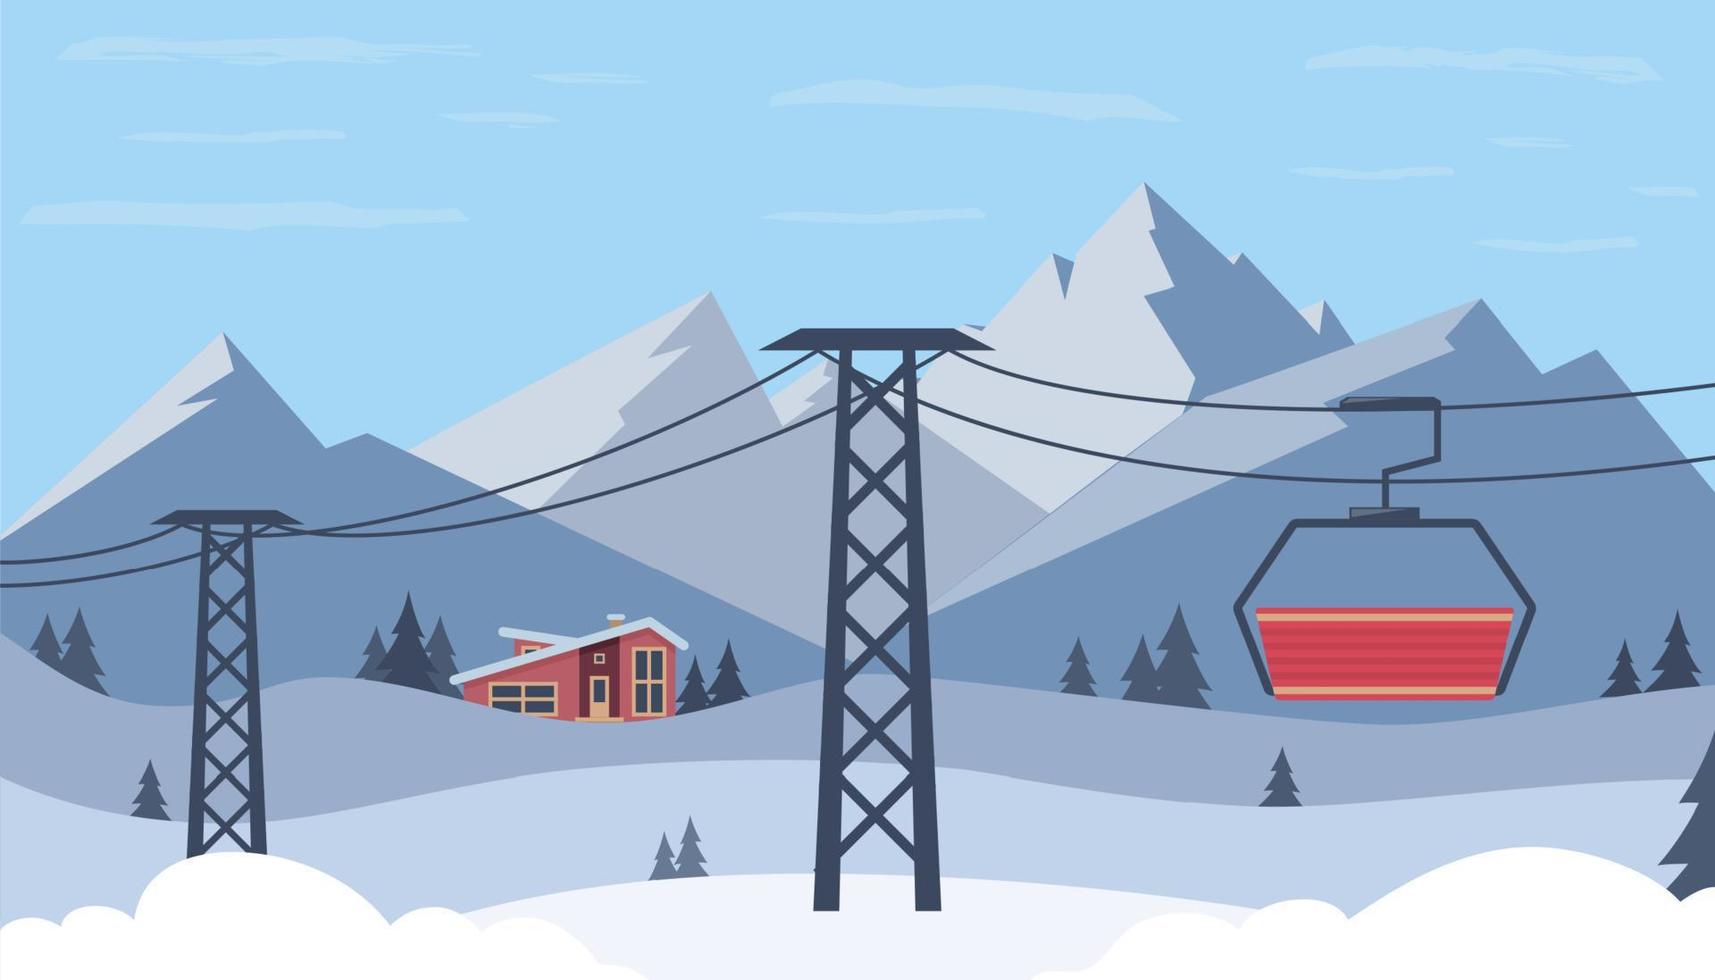 Ski resort. Winter mountain landscape with lodge, ski lift. Mountain tours conceptual web banner. Winter sports vacation. Vector illustration.